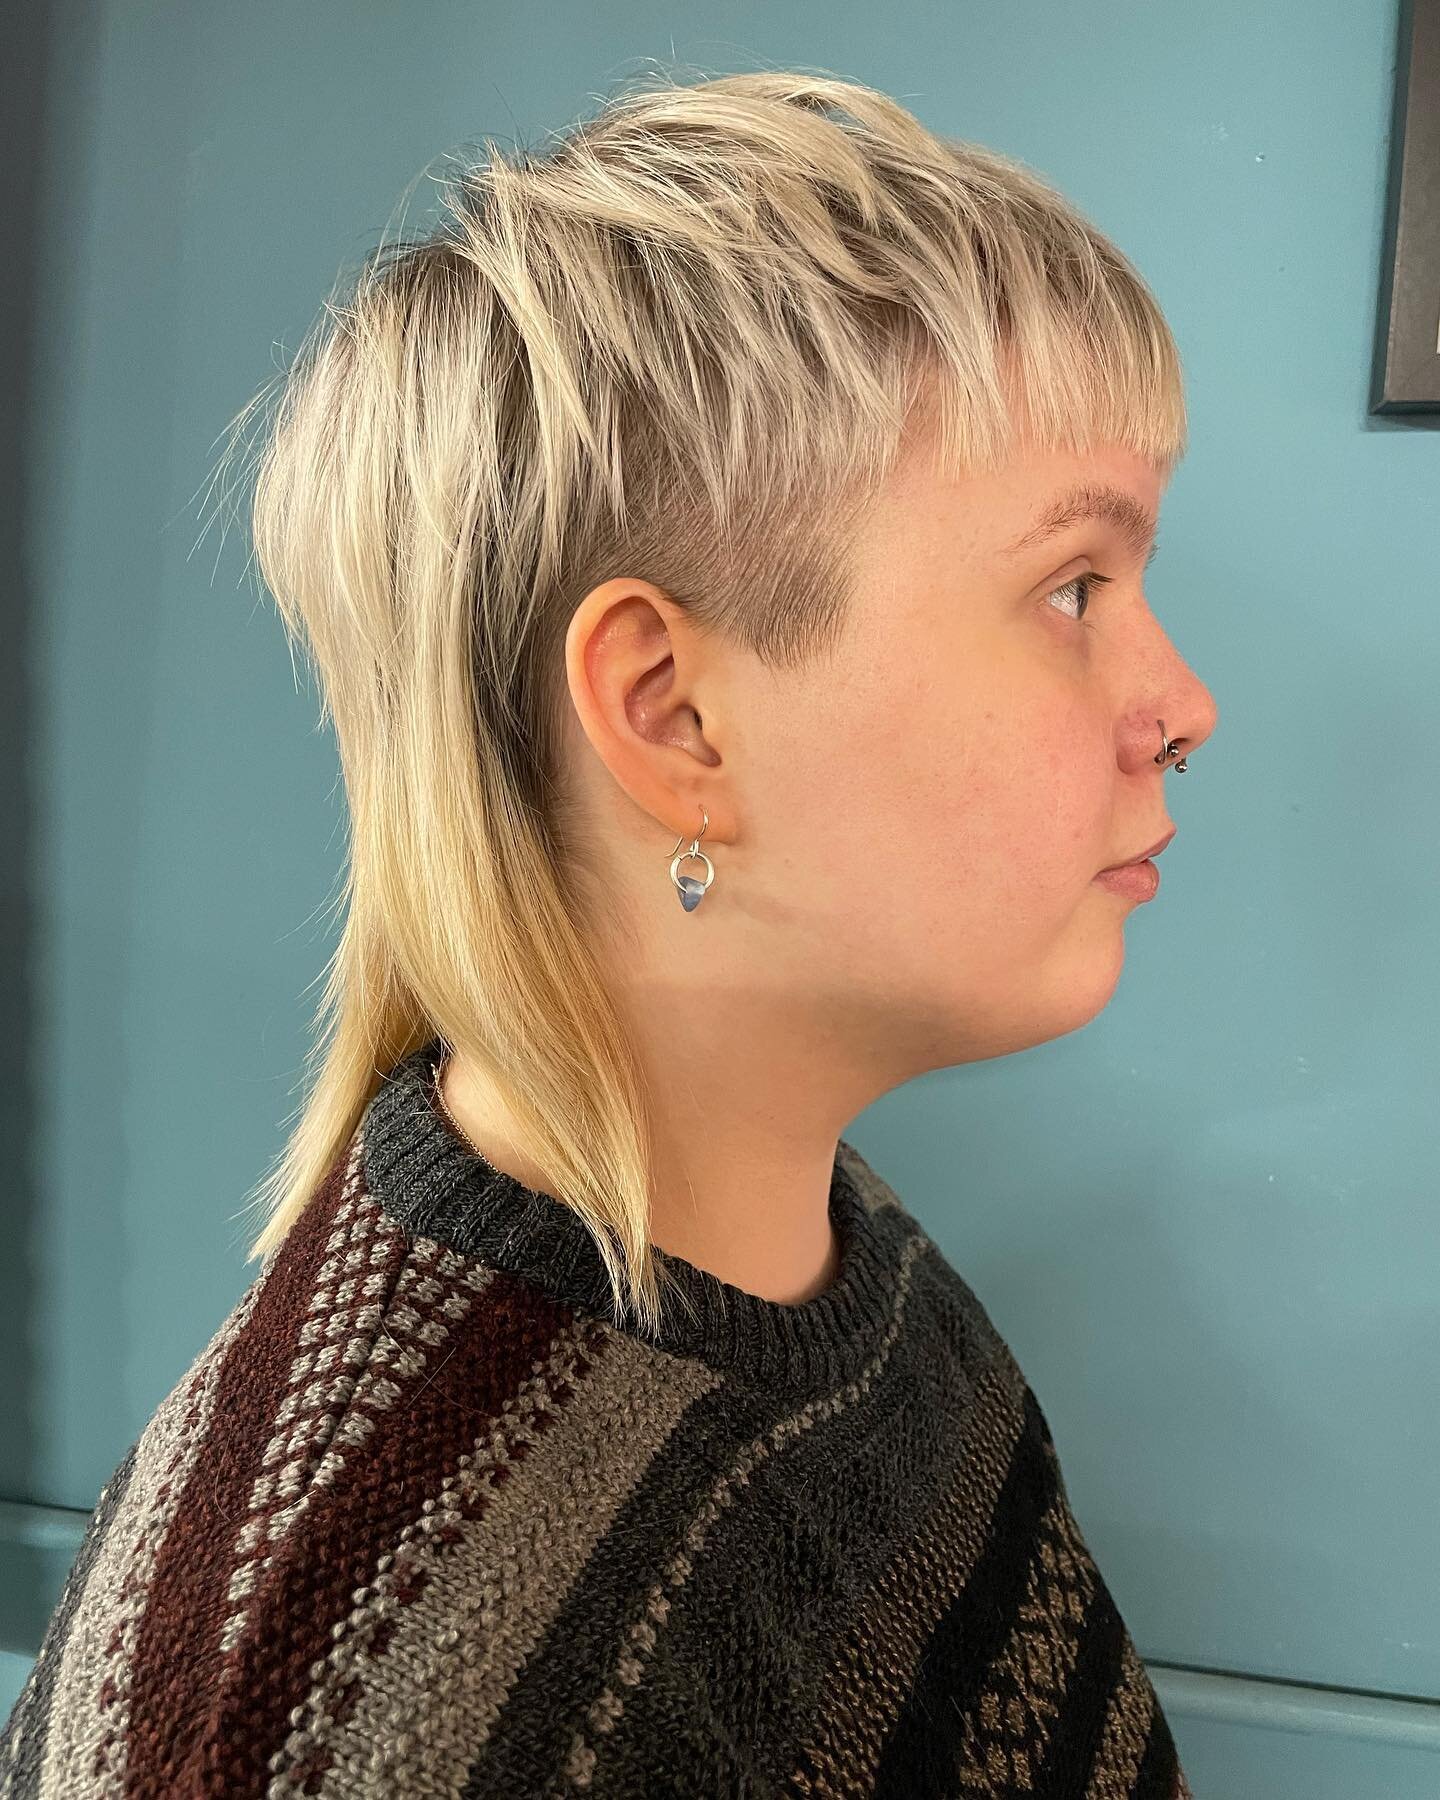 &ldquo;That I was born to run, I don't belong to anyone&rdquo; 
.
.
.
.
.
#hair #hairdressing #hairdresser #mullet #blondemullet #stylist #colourist #hairstylist #haircolourist #undercut #disconnectedhaircut #riothearts #heartbreakhairclub